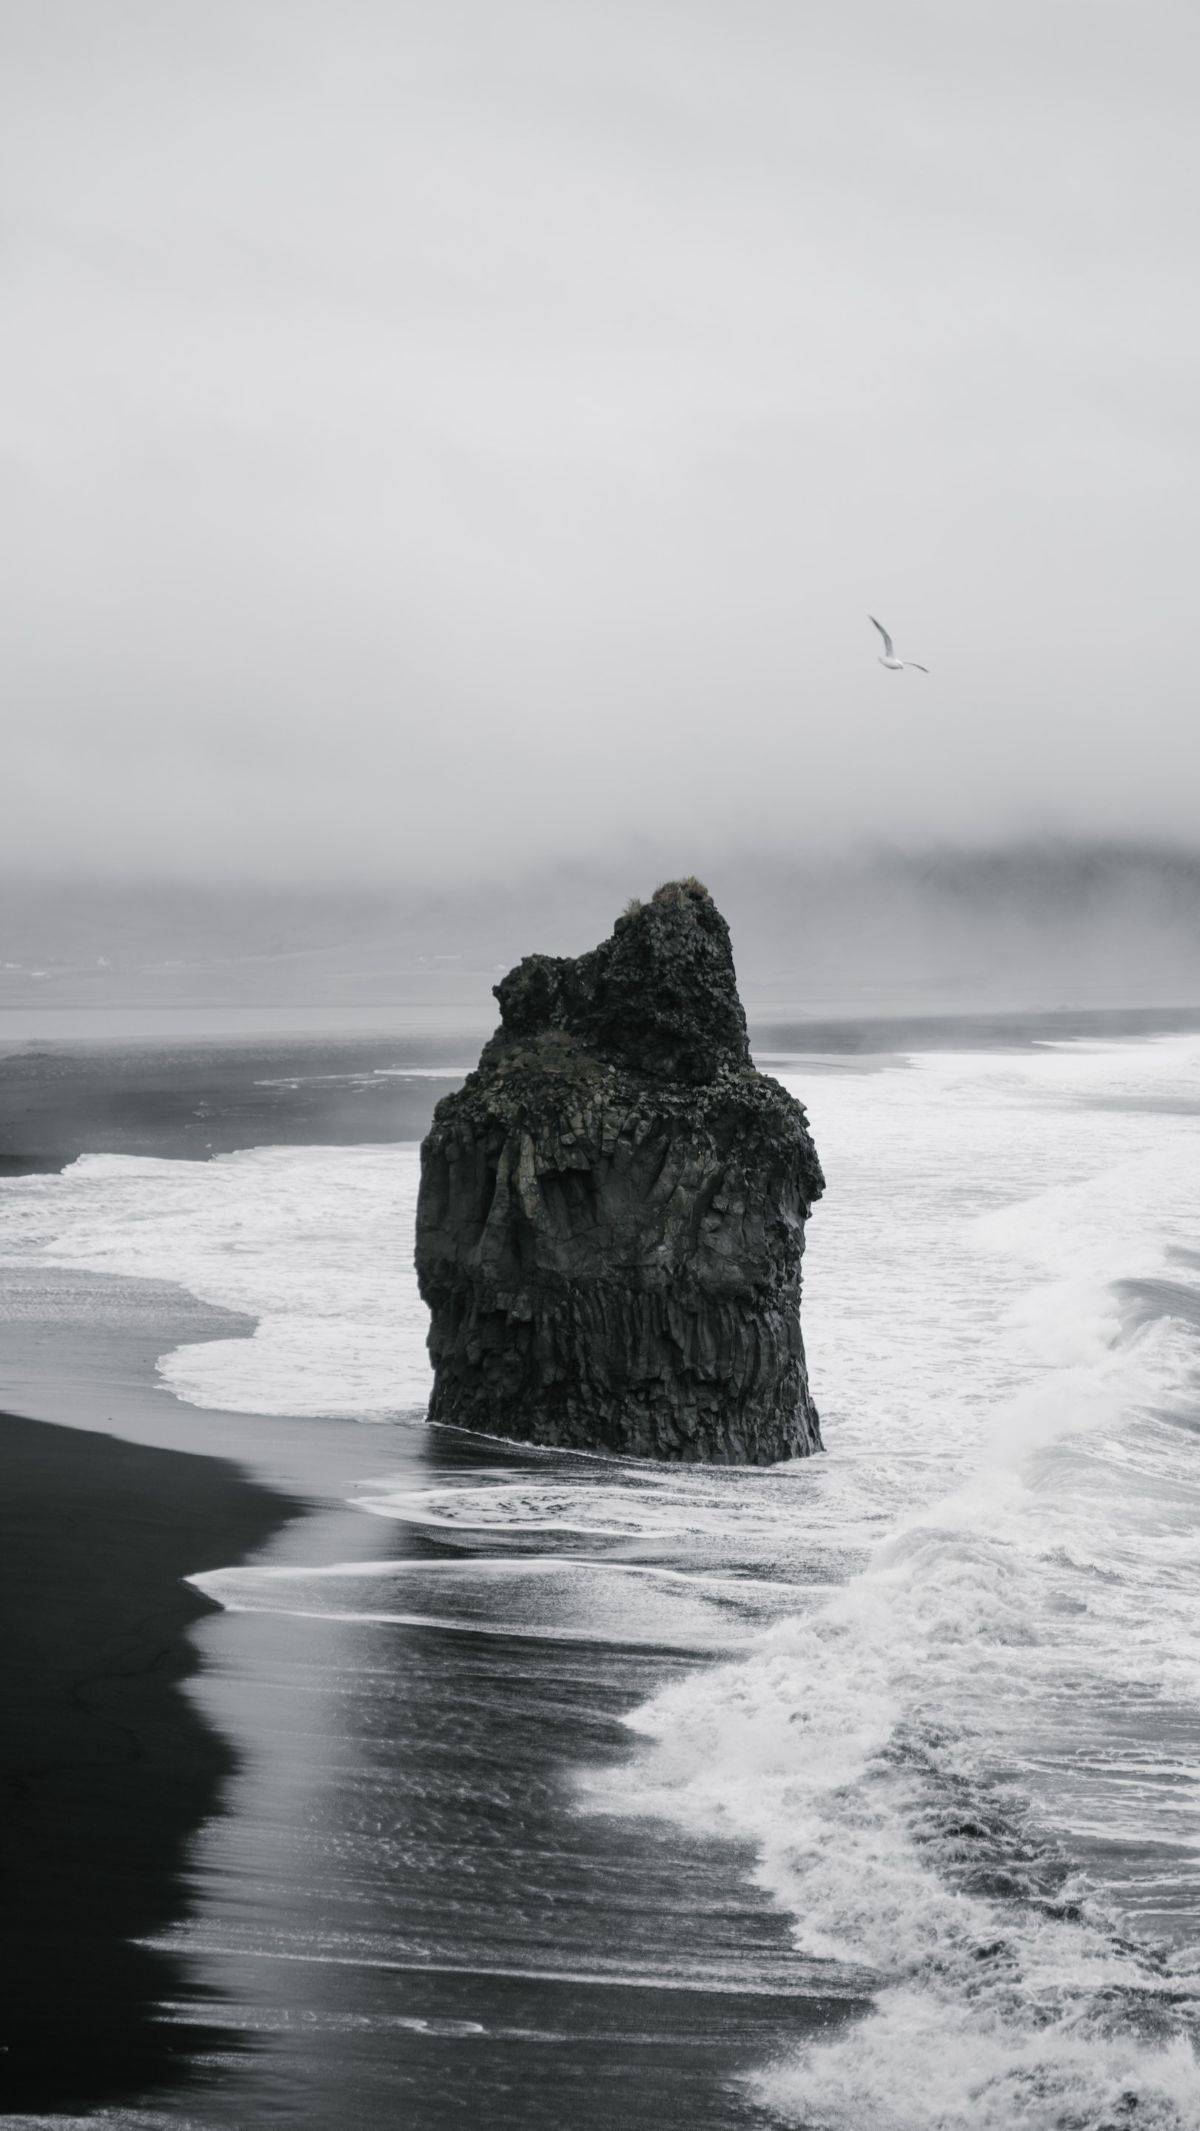 4. Vik, Iceland: Dramatic Beauty<br><br>Vik's black sand beach on Iceland's southern coast is a lovely blend of contrasts. The obsidian sands contrast starkly with the booming North Atlantic waves. This creates a breathtaking wonder that feels almost supernatural.<br><br>Photo: pexels-arthouse-studio